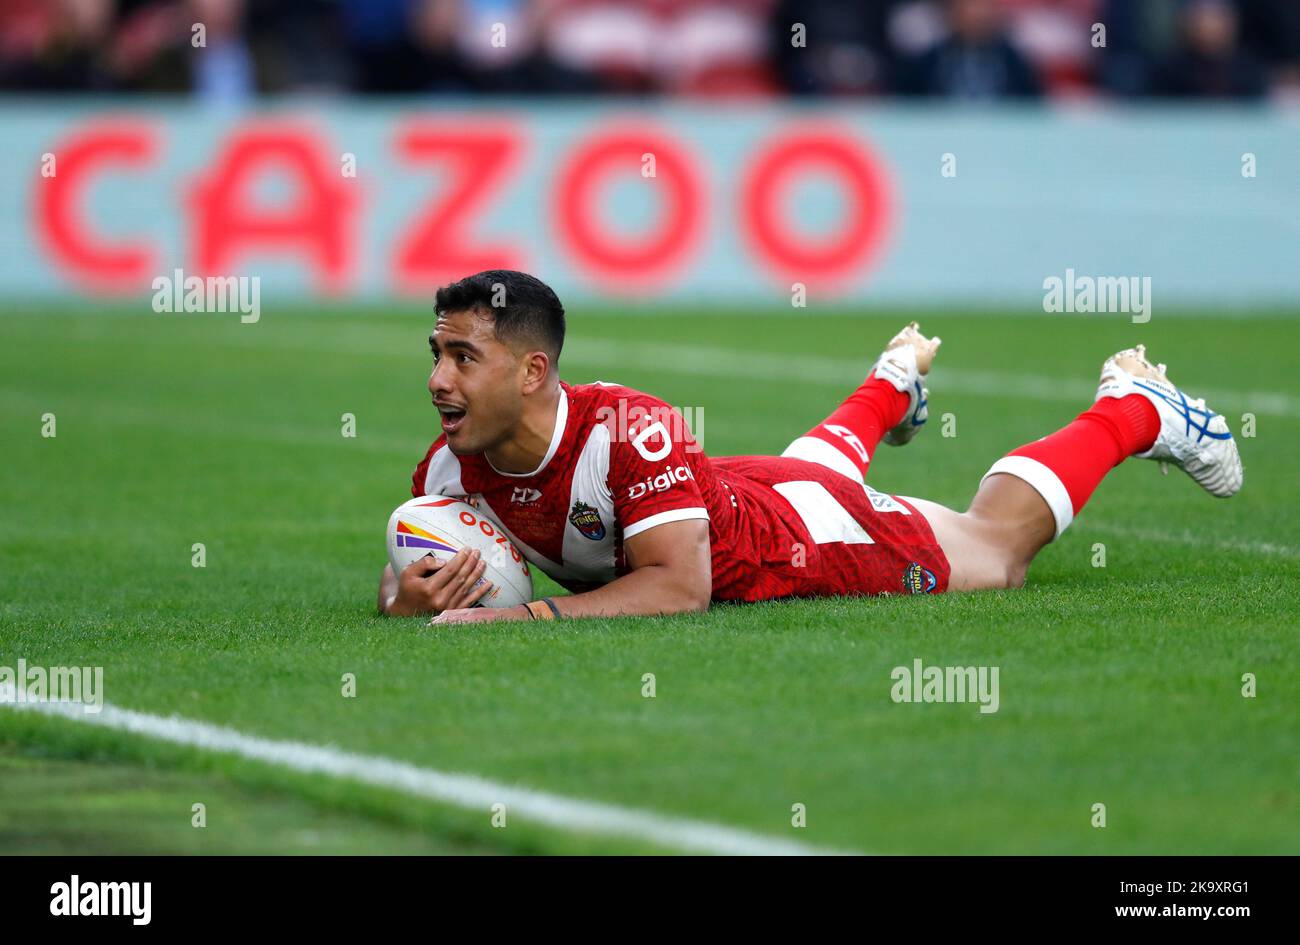 Tonga's Will Penisini scores a try during the Rugby League World